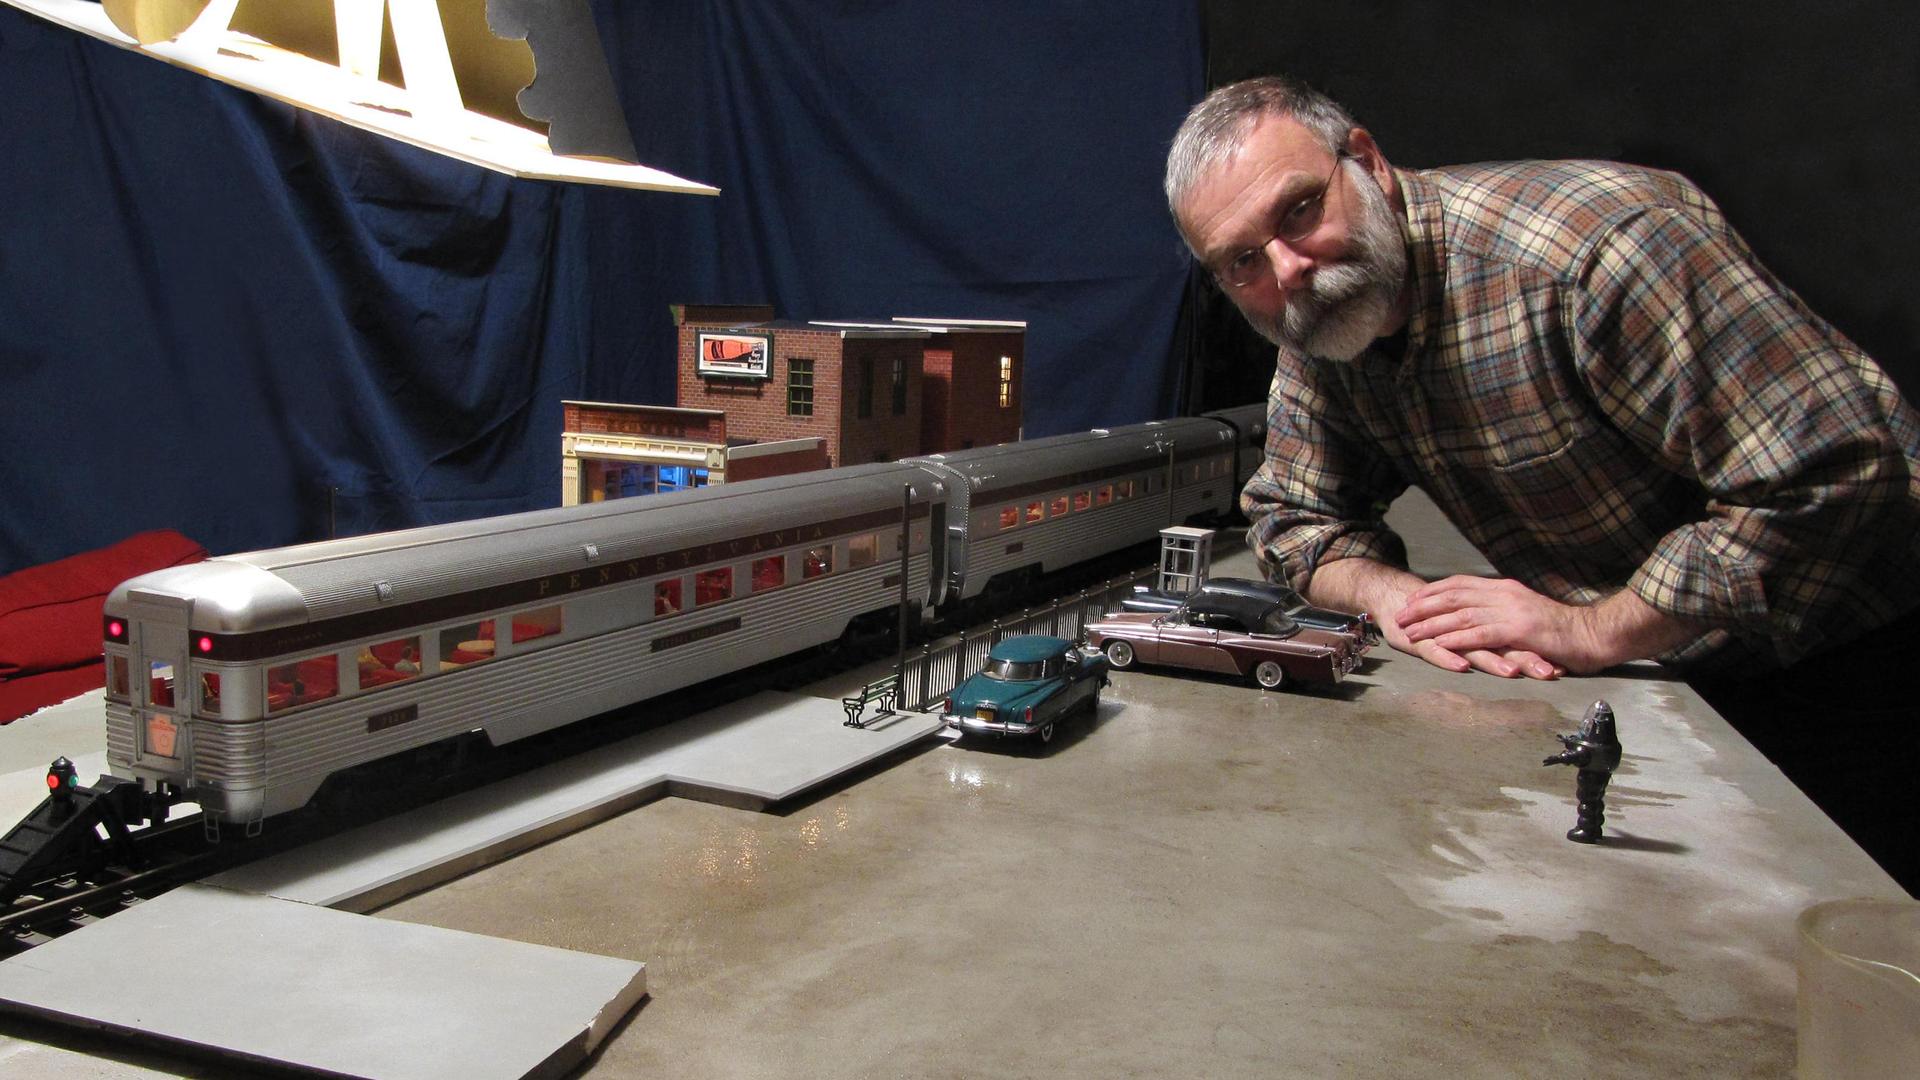 Model-maker Michael Paul Smith poses with a model of a passenger train.